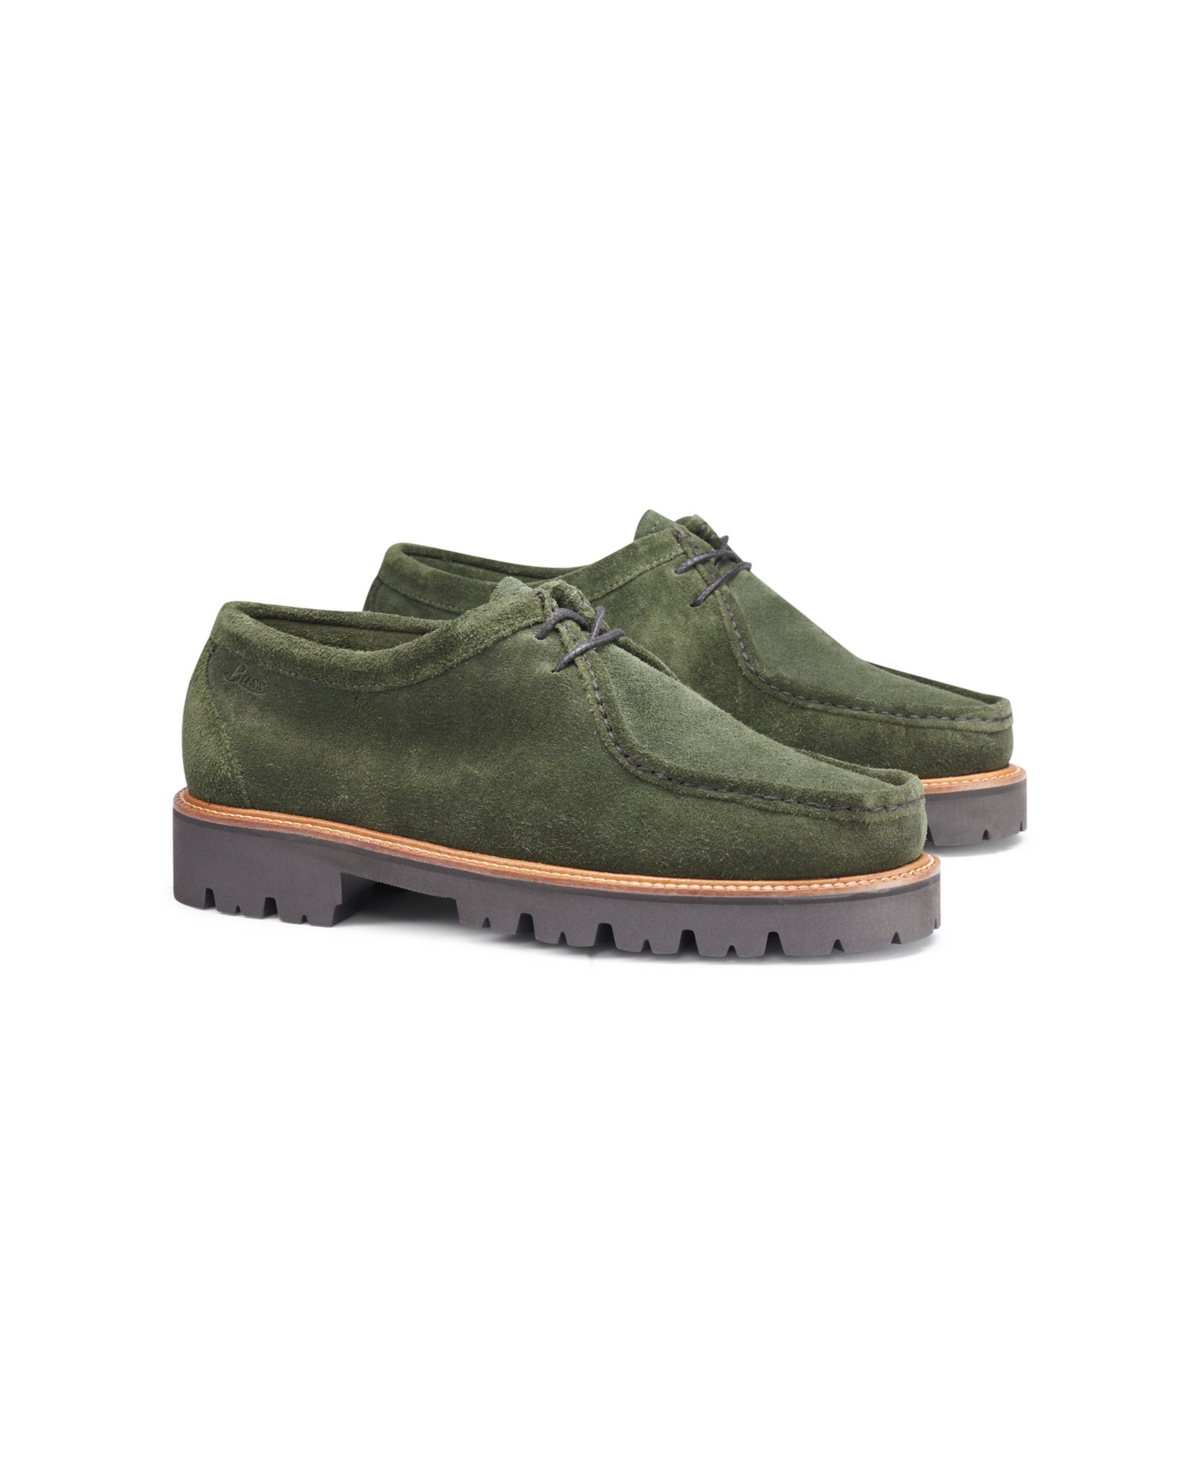 G.h.bass Men's Wallace Moc Hand Sewn Loafers - Green